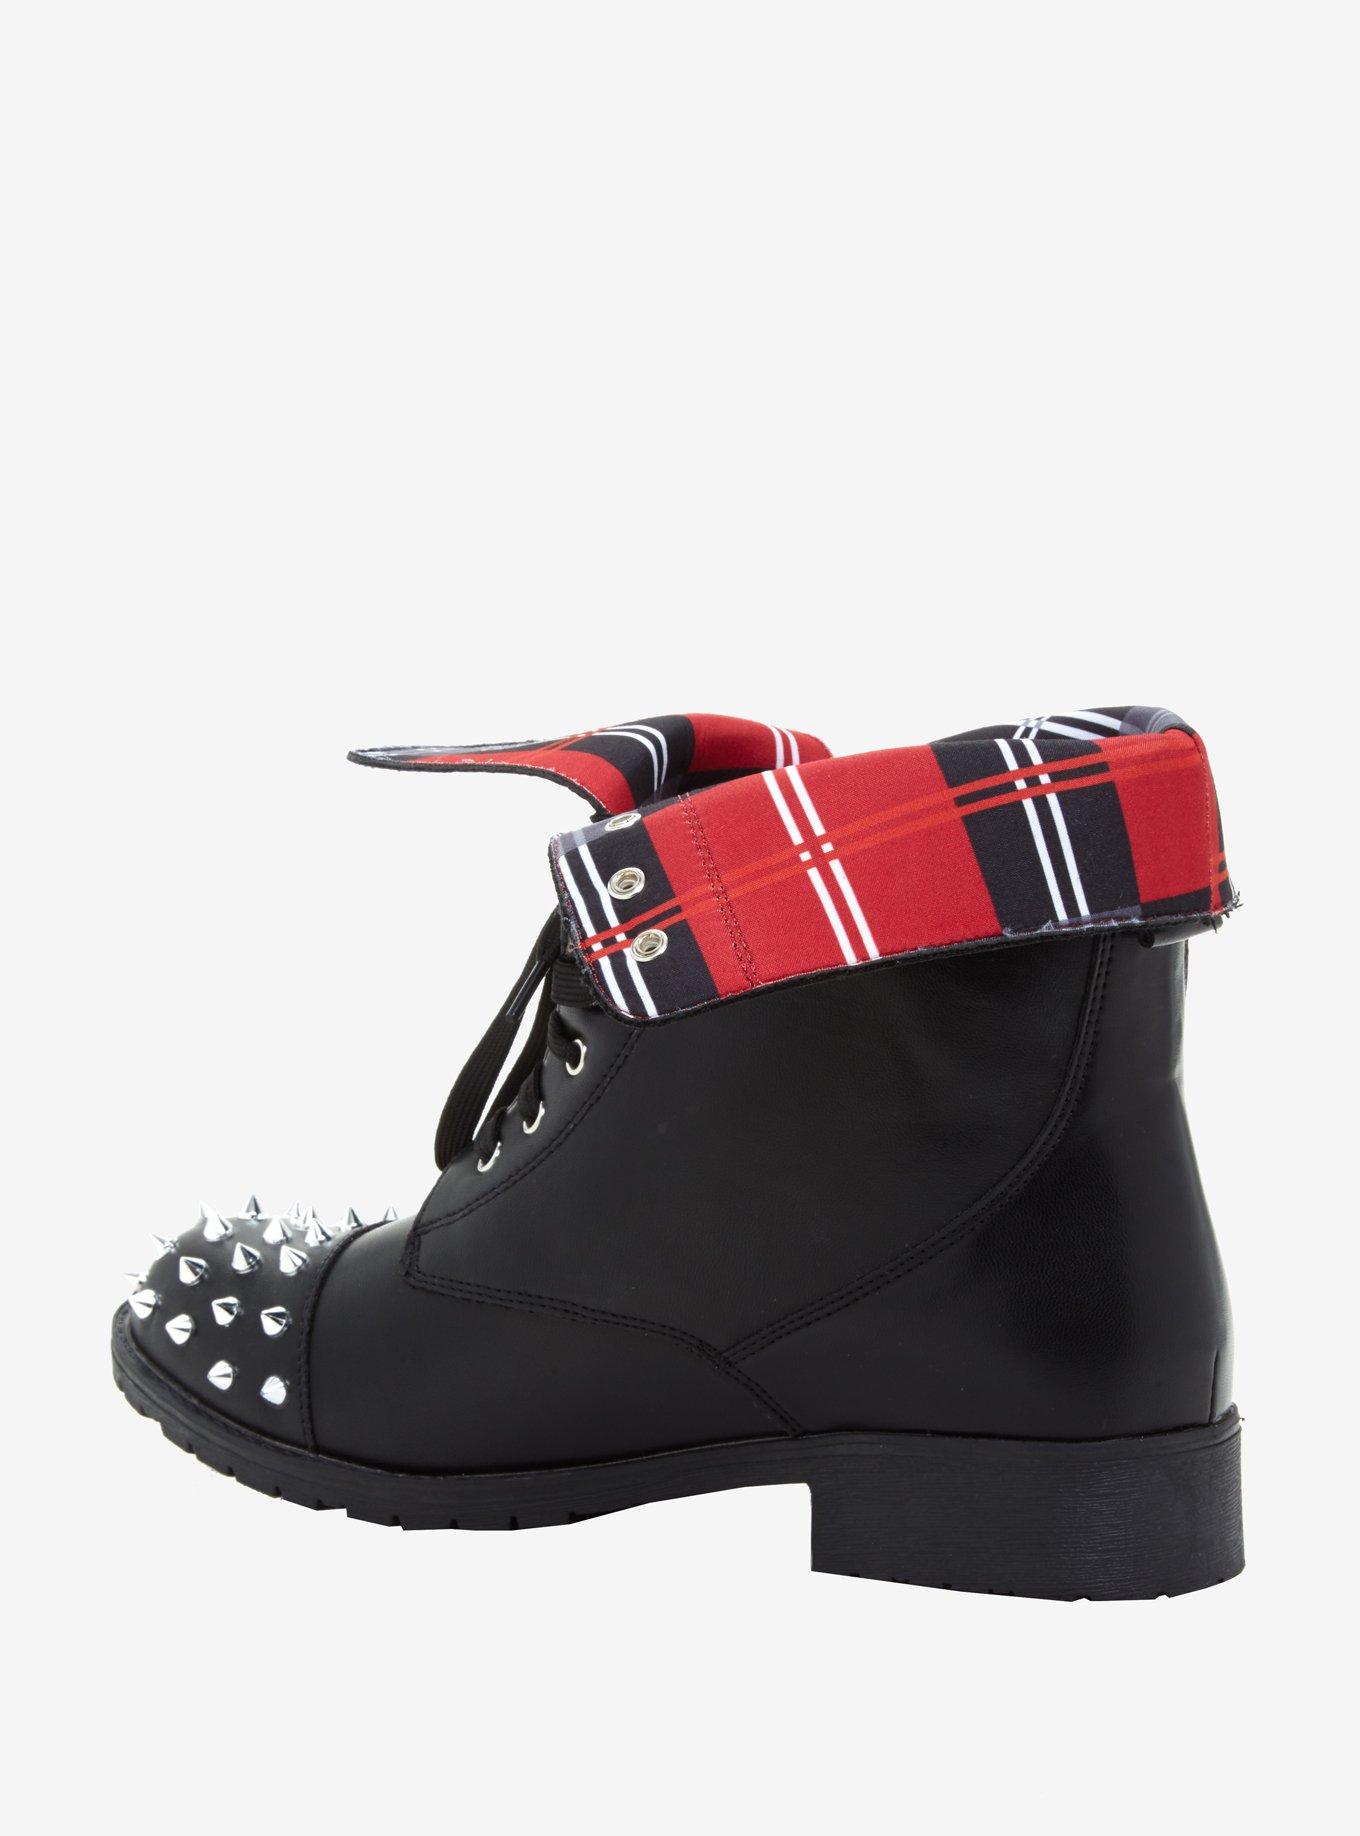 Riverdale Southside Serpents Studded Fold-Over Boots Hot Topic Exclusive, MULTI, alternate